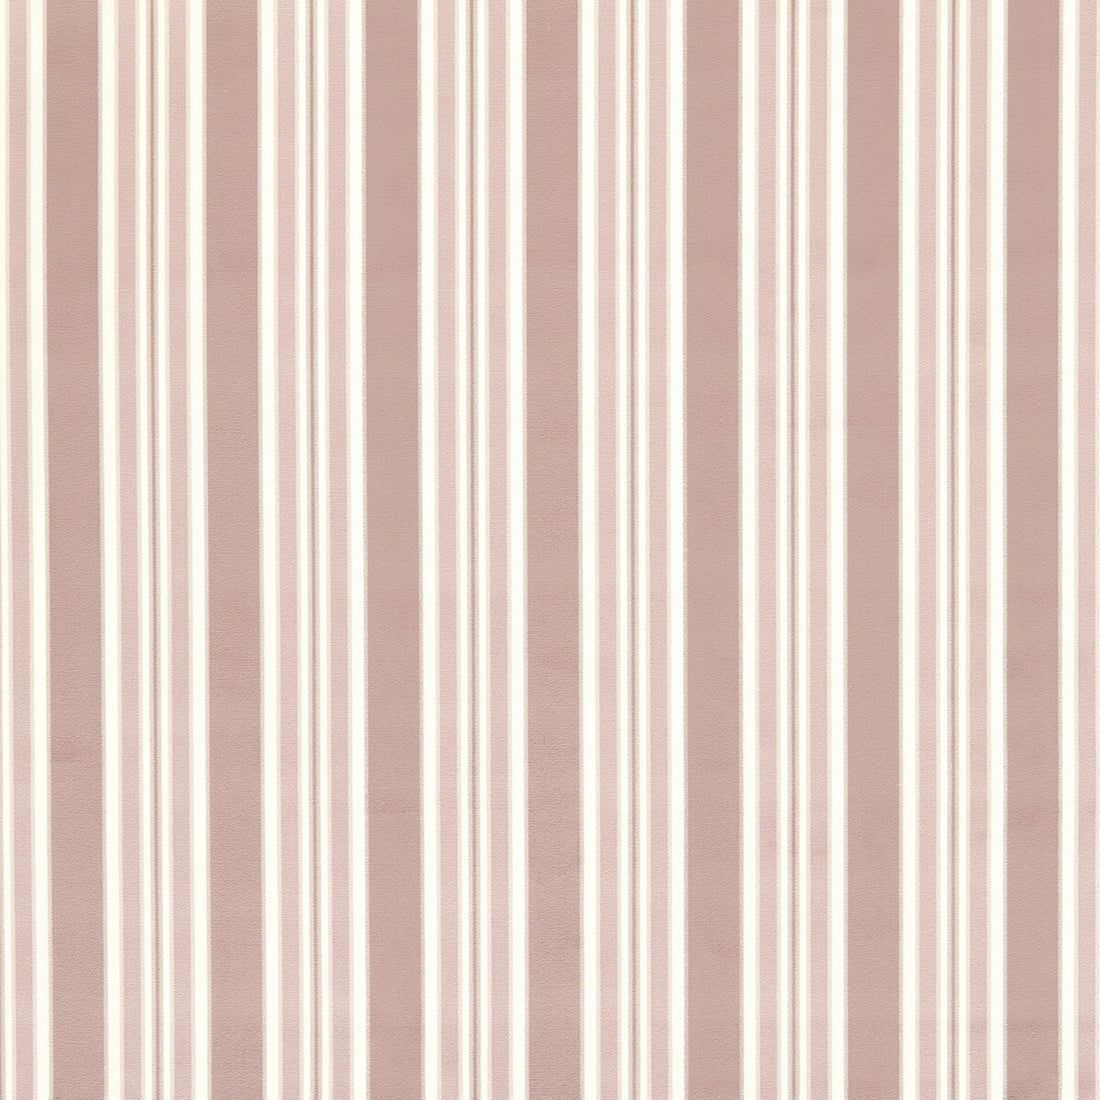 Wilmott fabric in blush color - pattern F1691/02.CAC.0 - by Clarke And Clarke in the Whitworth collection